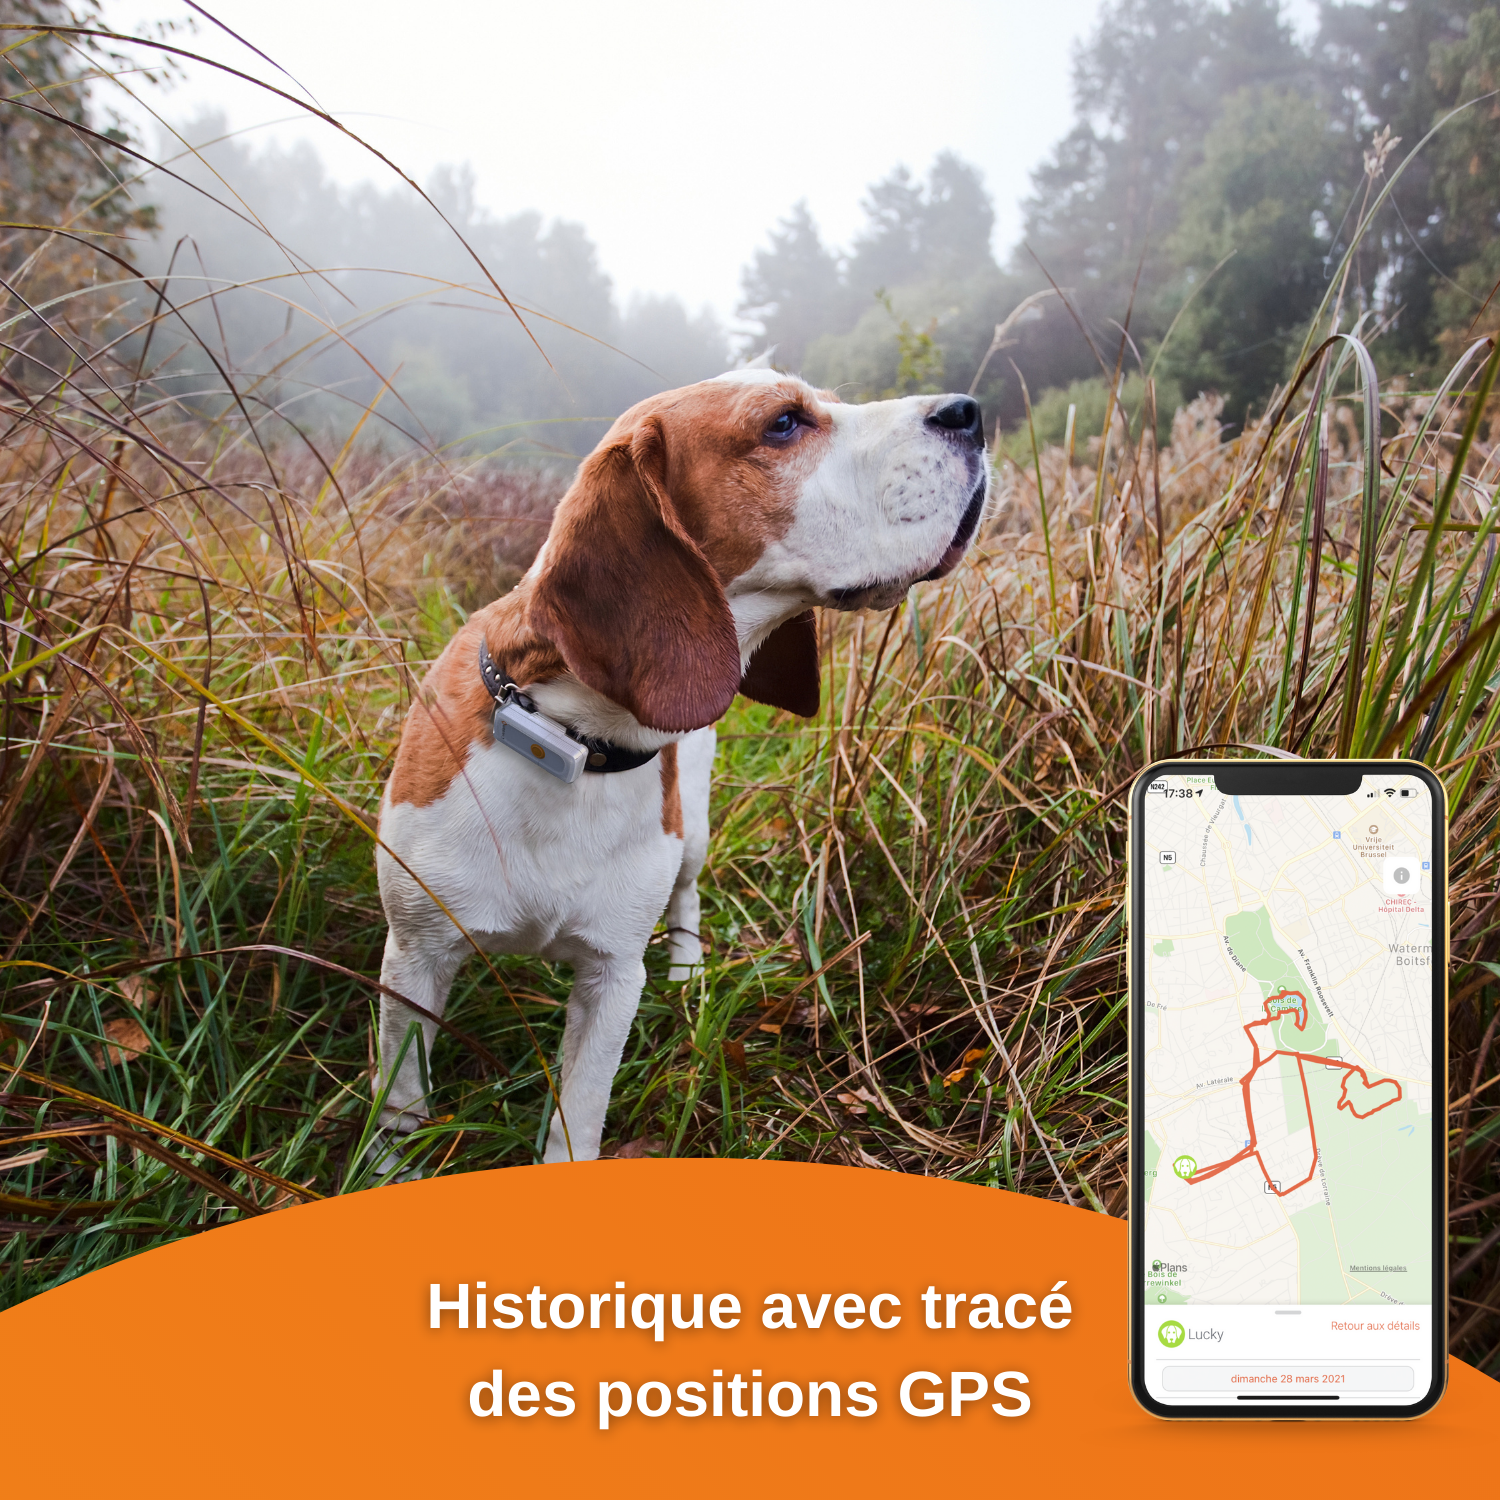 GPS pour chien Weenect Dogs 2